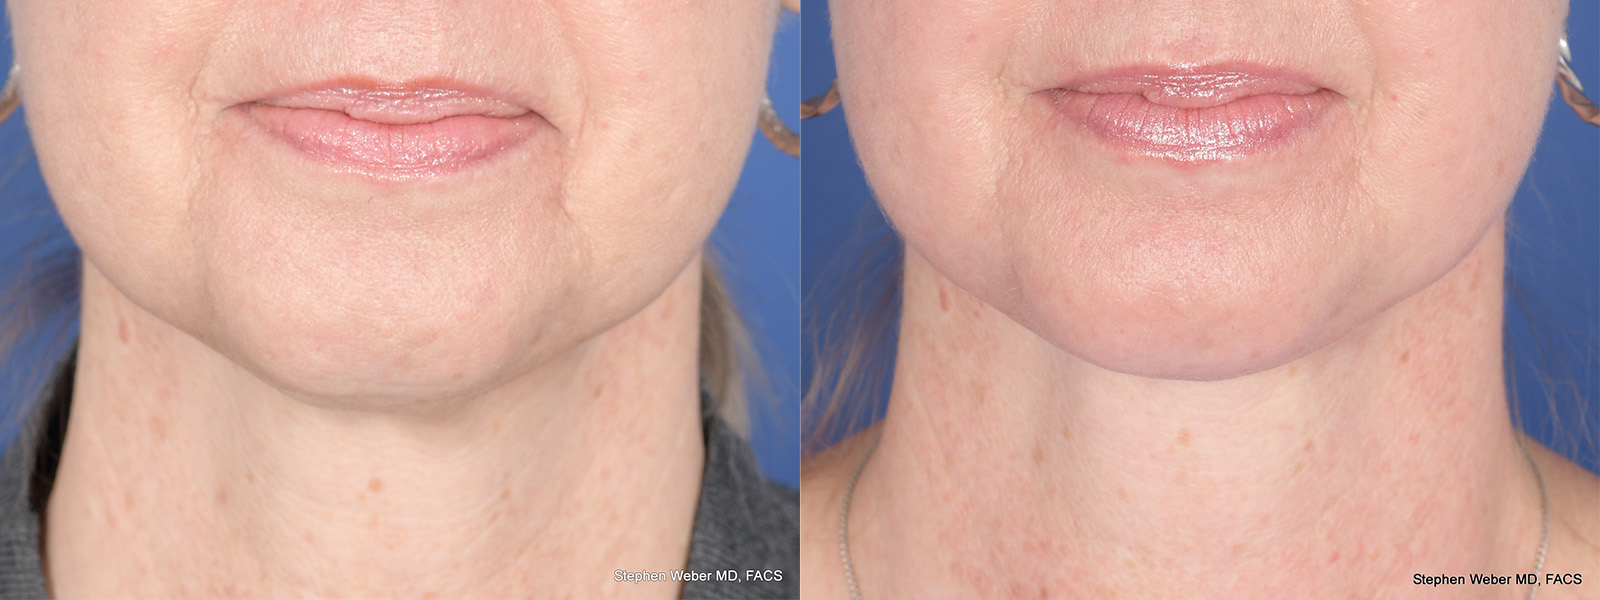 Necklift Before and After | Weber Facial Plastic Surgery